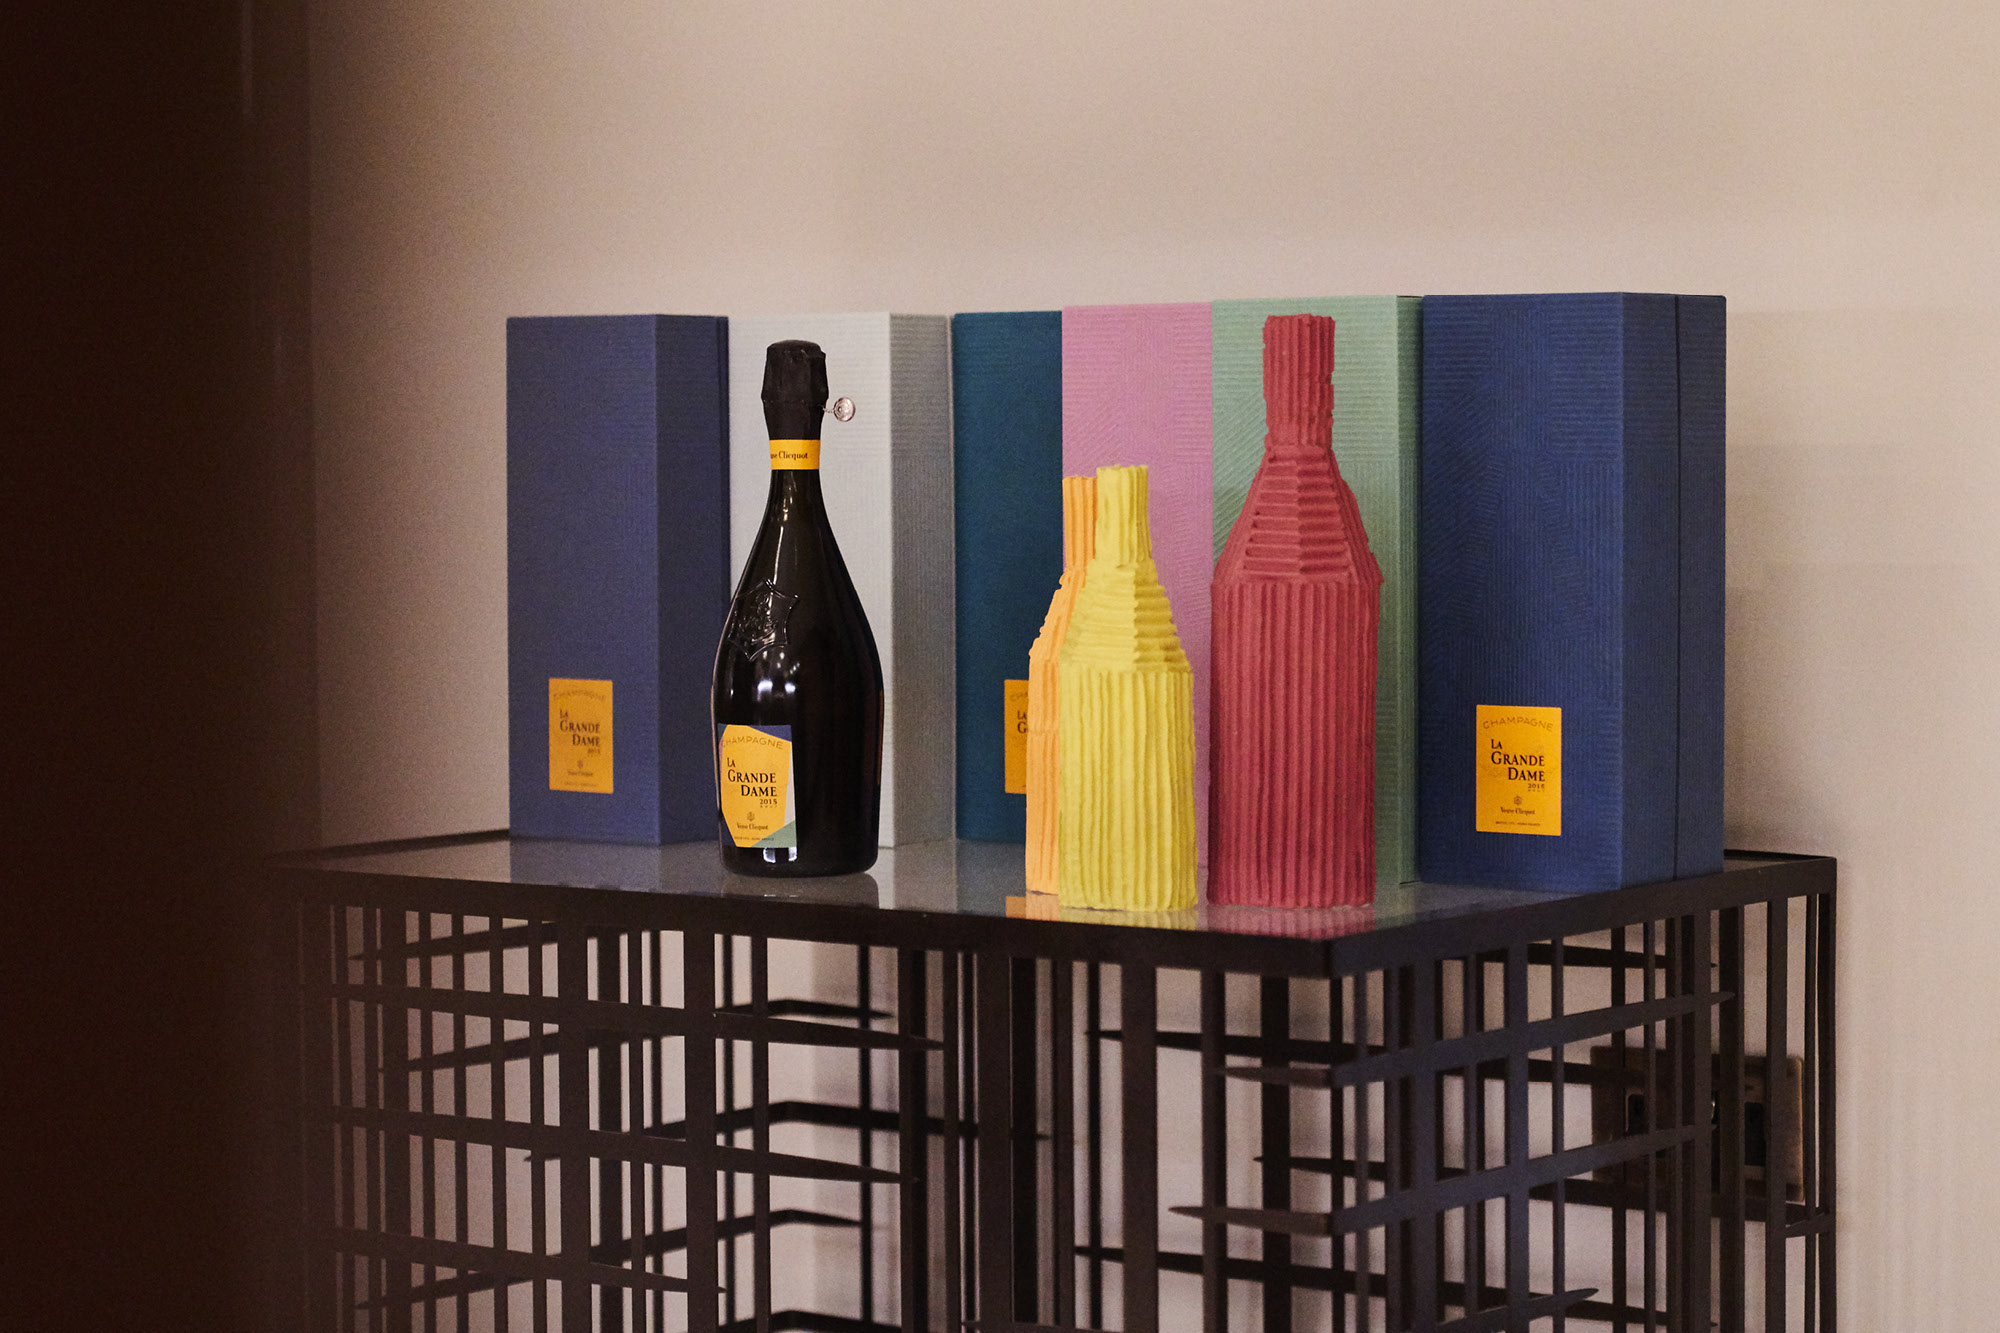 The collaboration features a collection of six cases made from corrugated cardboard